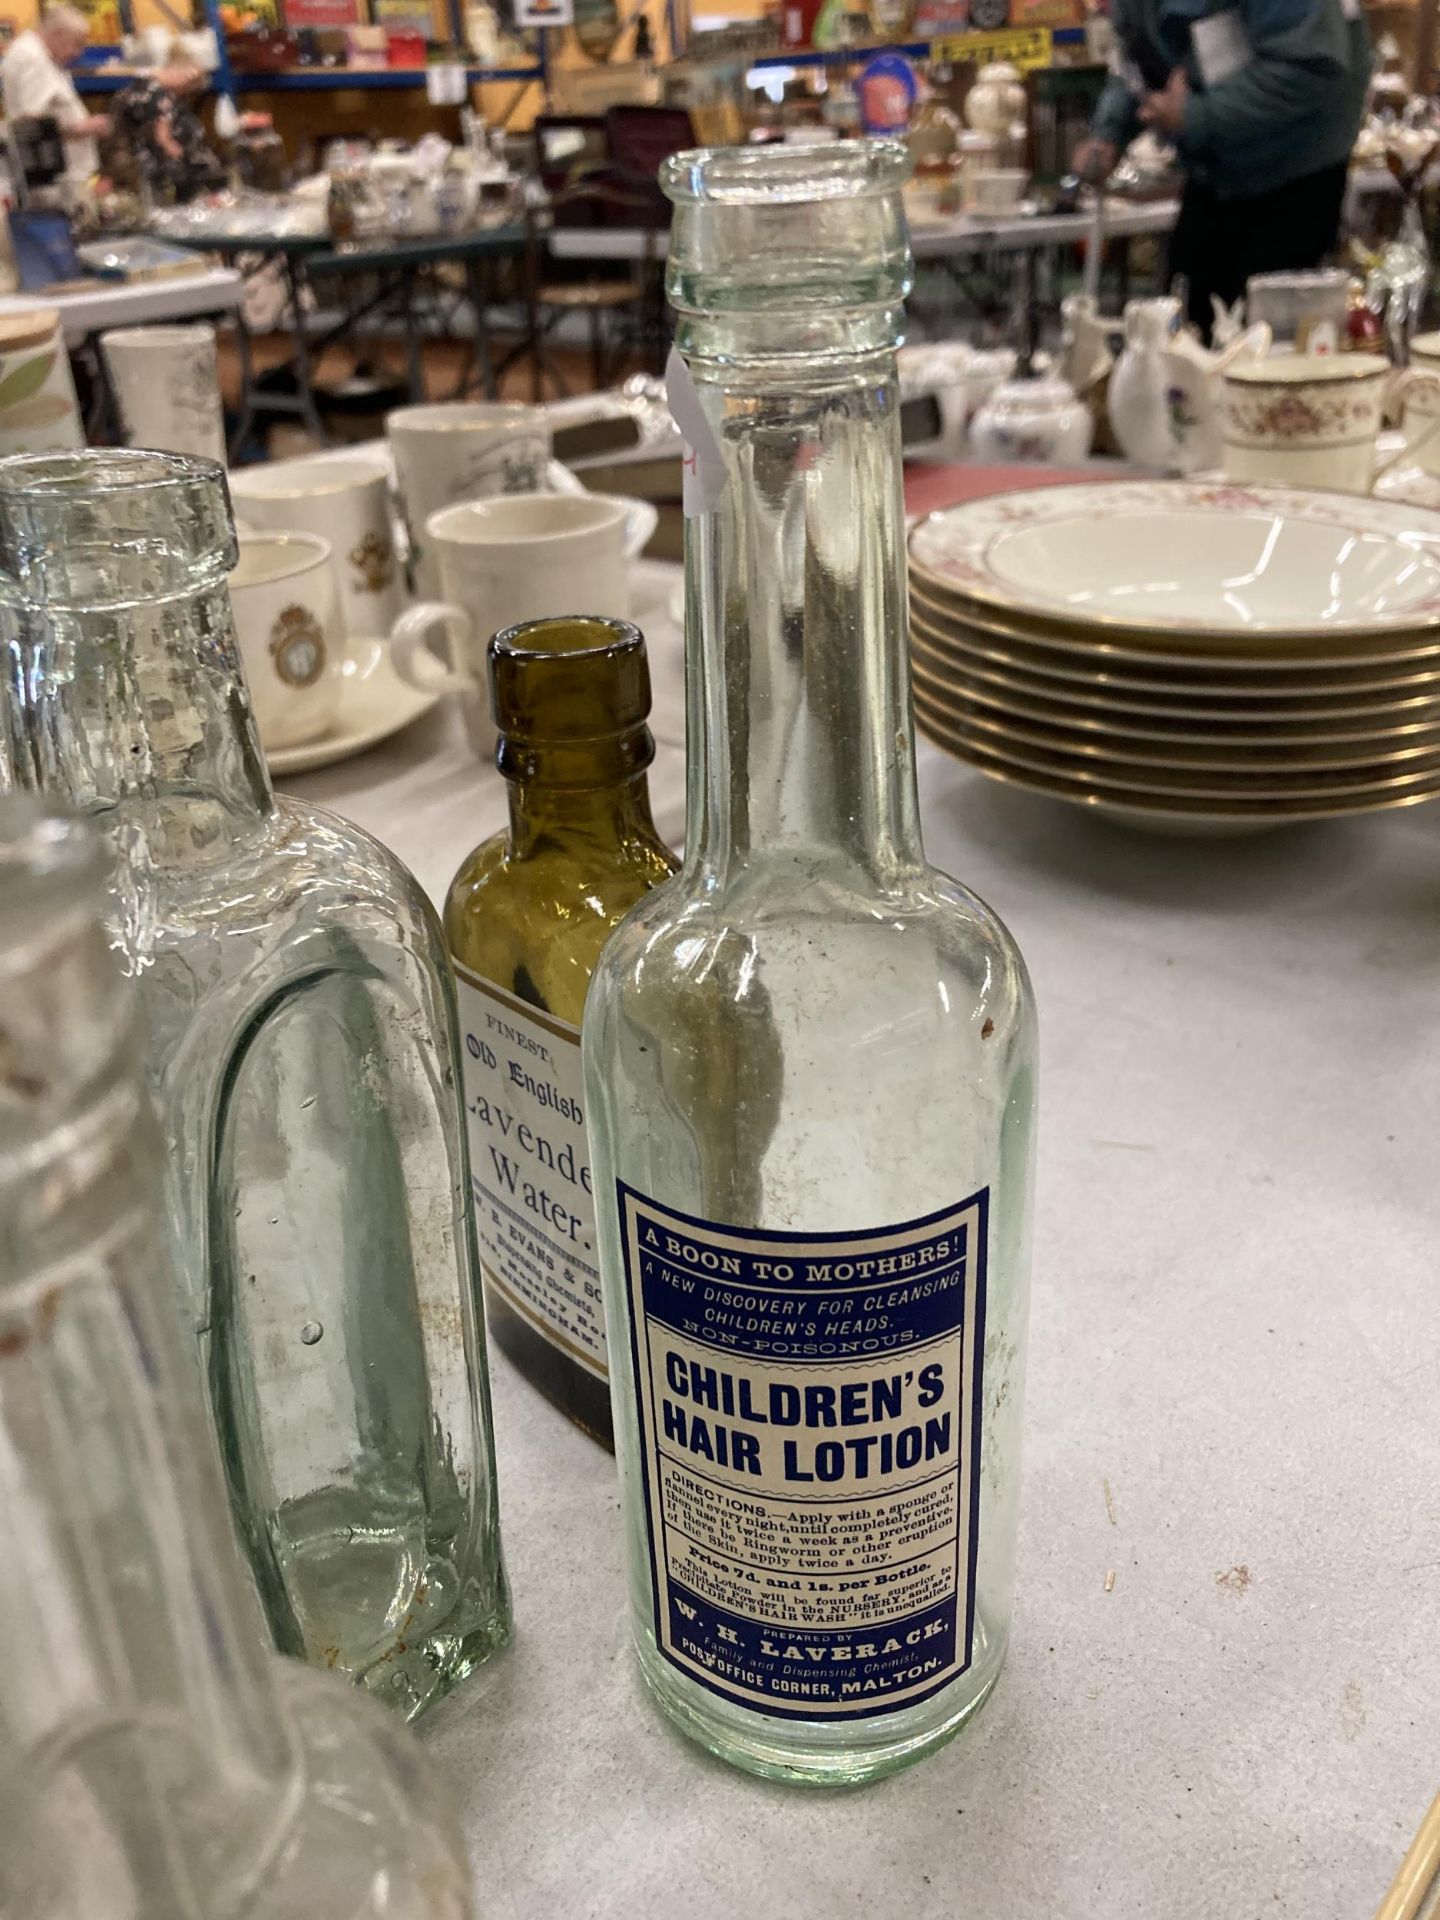 ACOLLECTION OF VINTAGE ADVERTISING BOTTLES TO INCLUDE OXO, LAVENDER WATER, SYRUP OF FIGS, ETC - Bild 4 aus 4